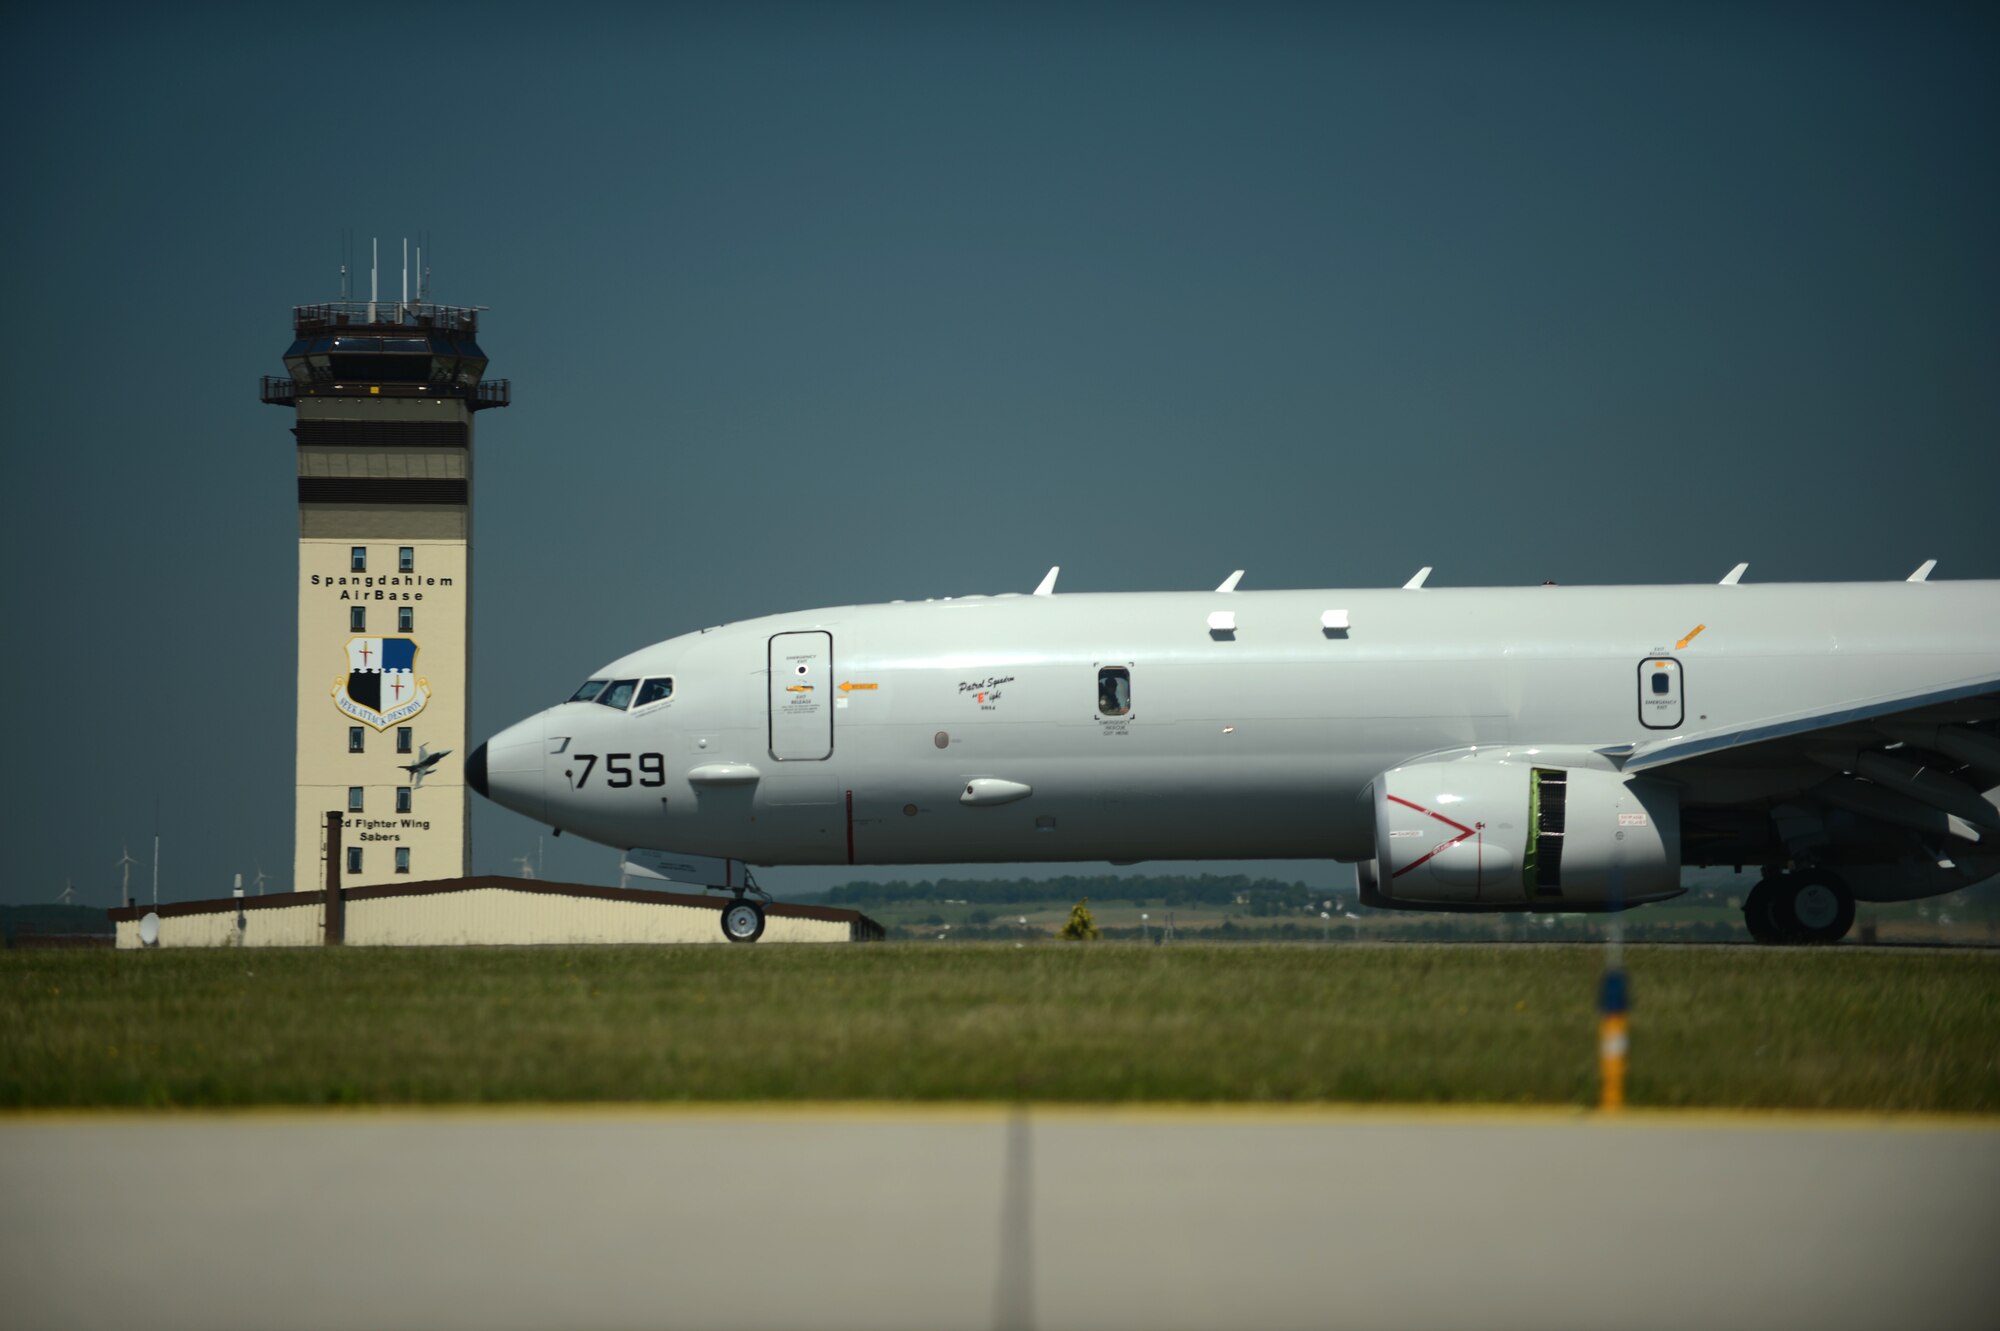 A Boeing P-8 Poseidon arrives on the flightline of Spangdahlem Air Base, Germany, June 5, 2015. The aircraft arrived at Spangdahlem to support BALTOPS 2015, an annual multi-national exercise designed to increase interoperability and promote friendship with participating nations. The crew aboard will conduct training on anti-submarine and anti-surface warfare throughout the duration of the exercise. (U.S. Air Force photo by Senior Airman Gustavo Castillo/Released)